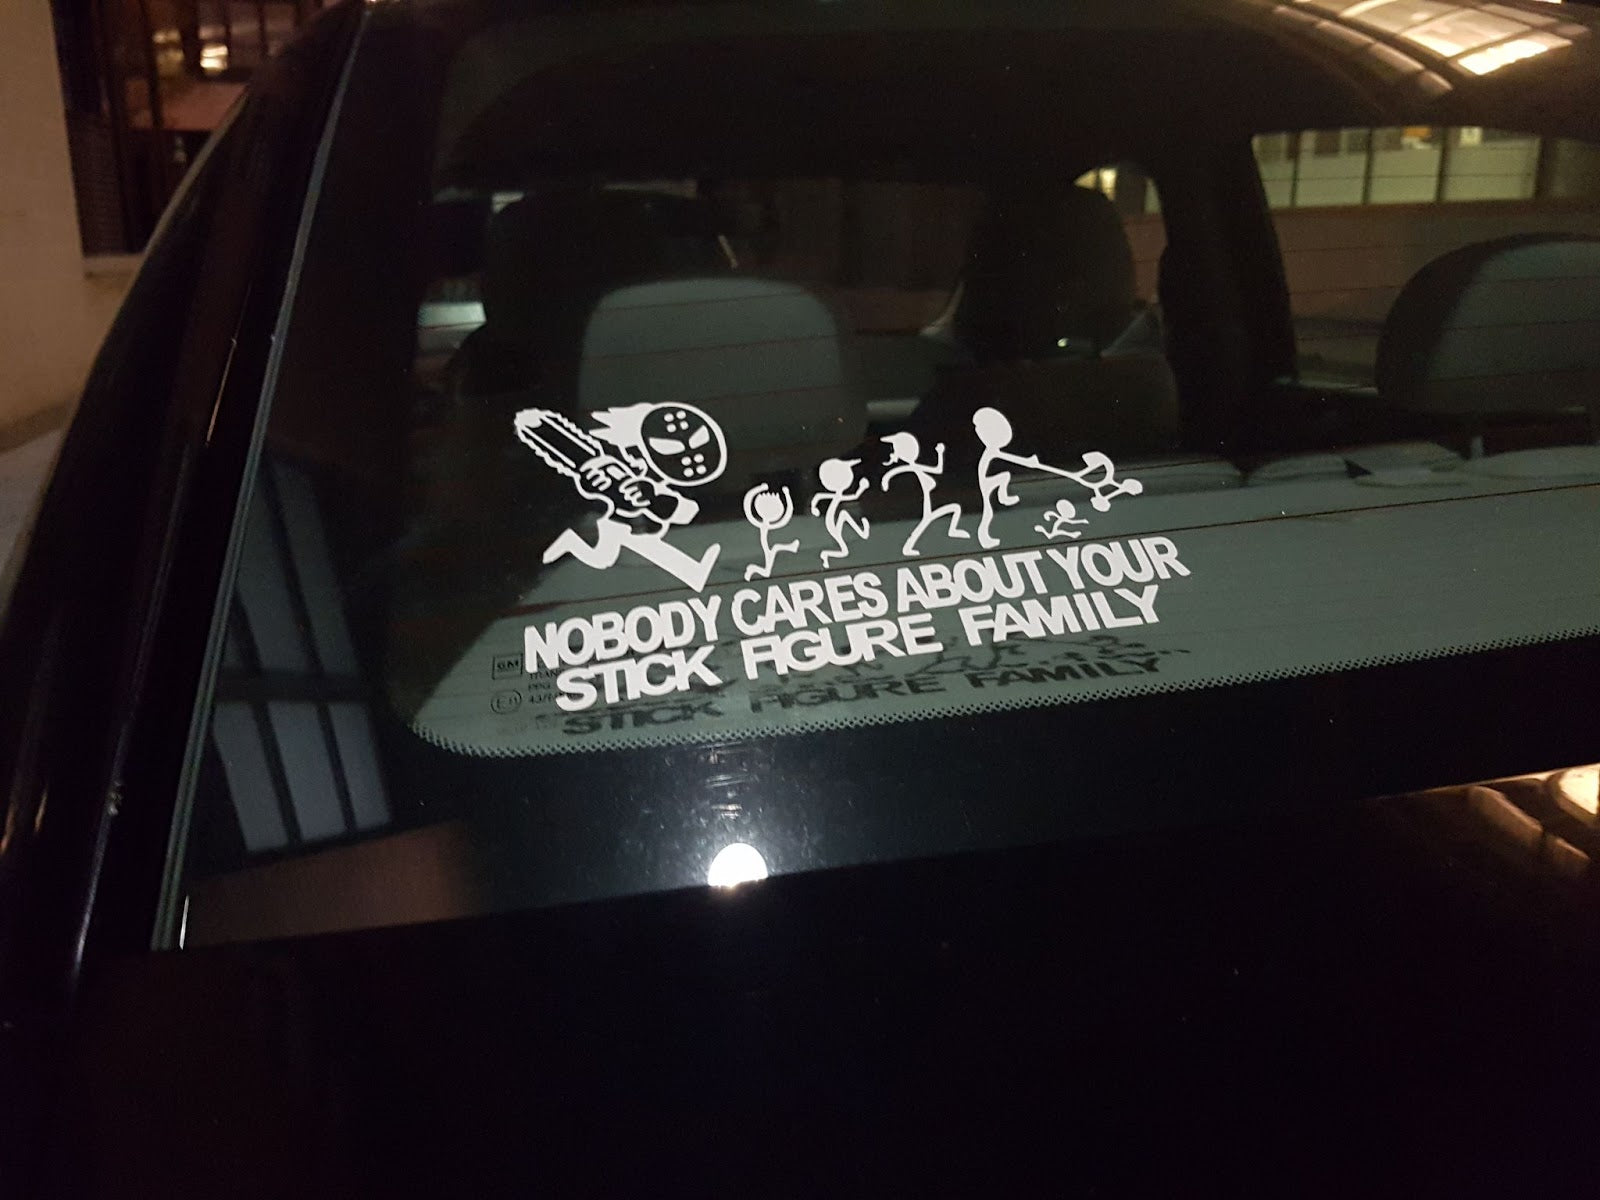 Application Method to use vinyl for car decals